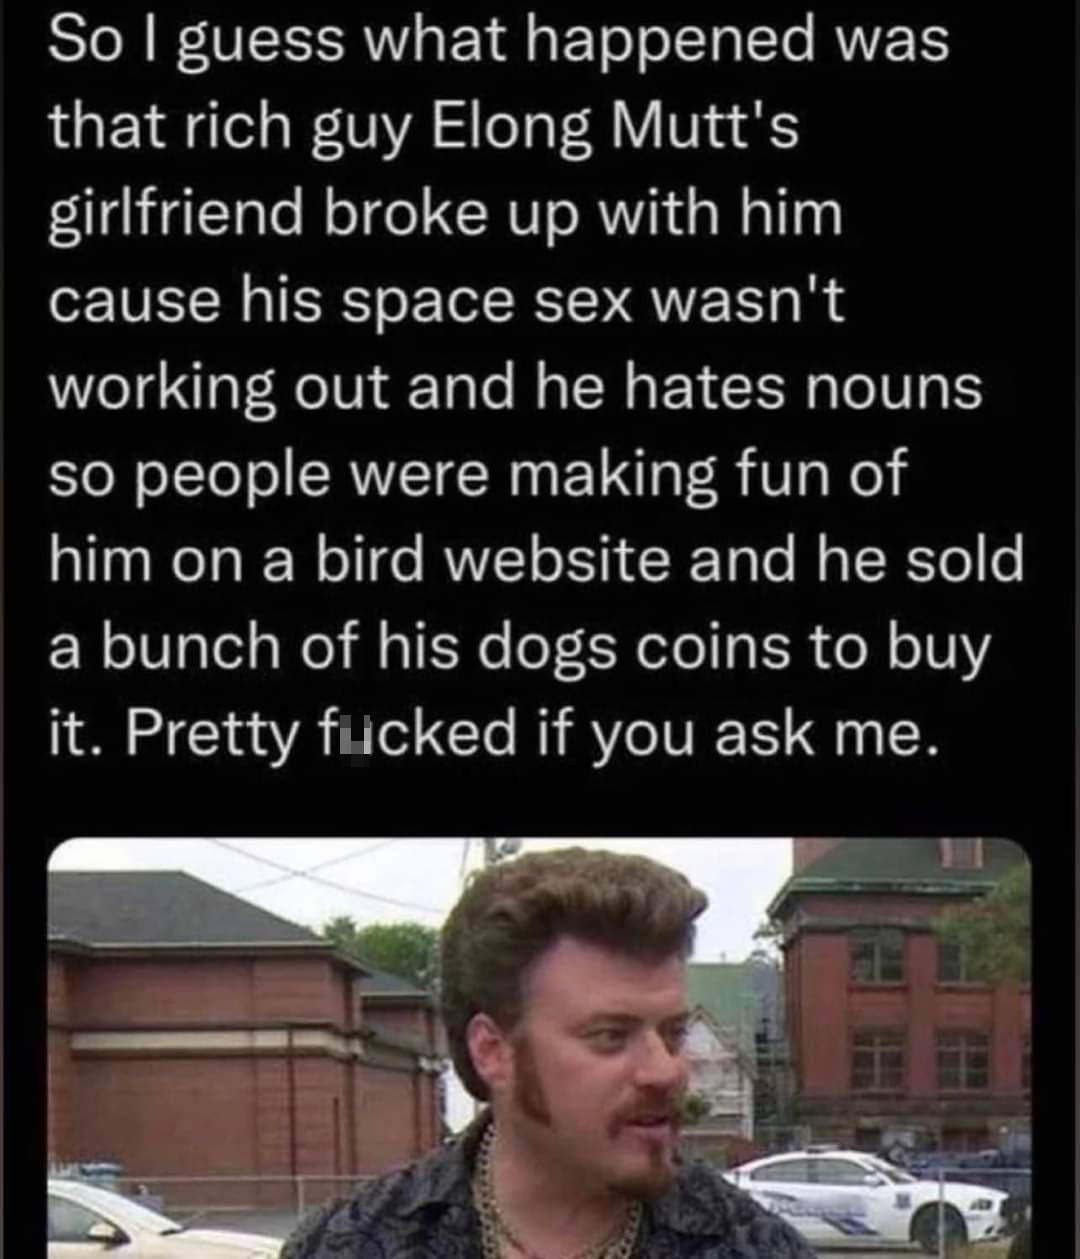 monday morning randomness - elong mutts - So I guess what happened was that rich guy Elong Mutt's girlfriend broke up with him. cause his space sex wasn't working out and he hates nouns so people were making fun of him on a bird website and he sold a bunc